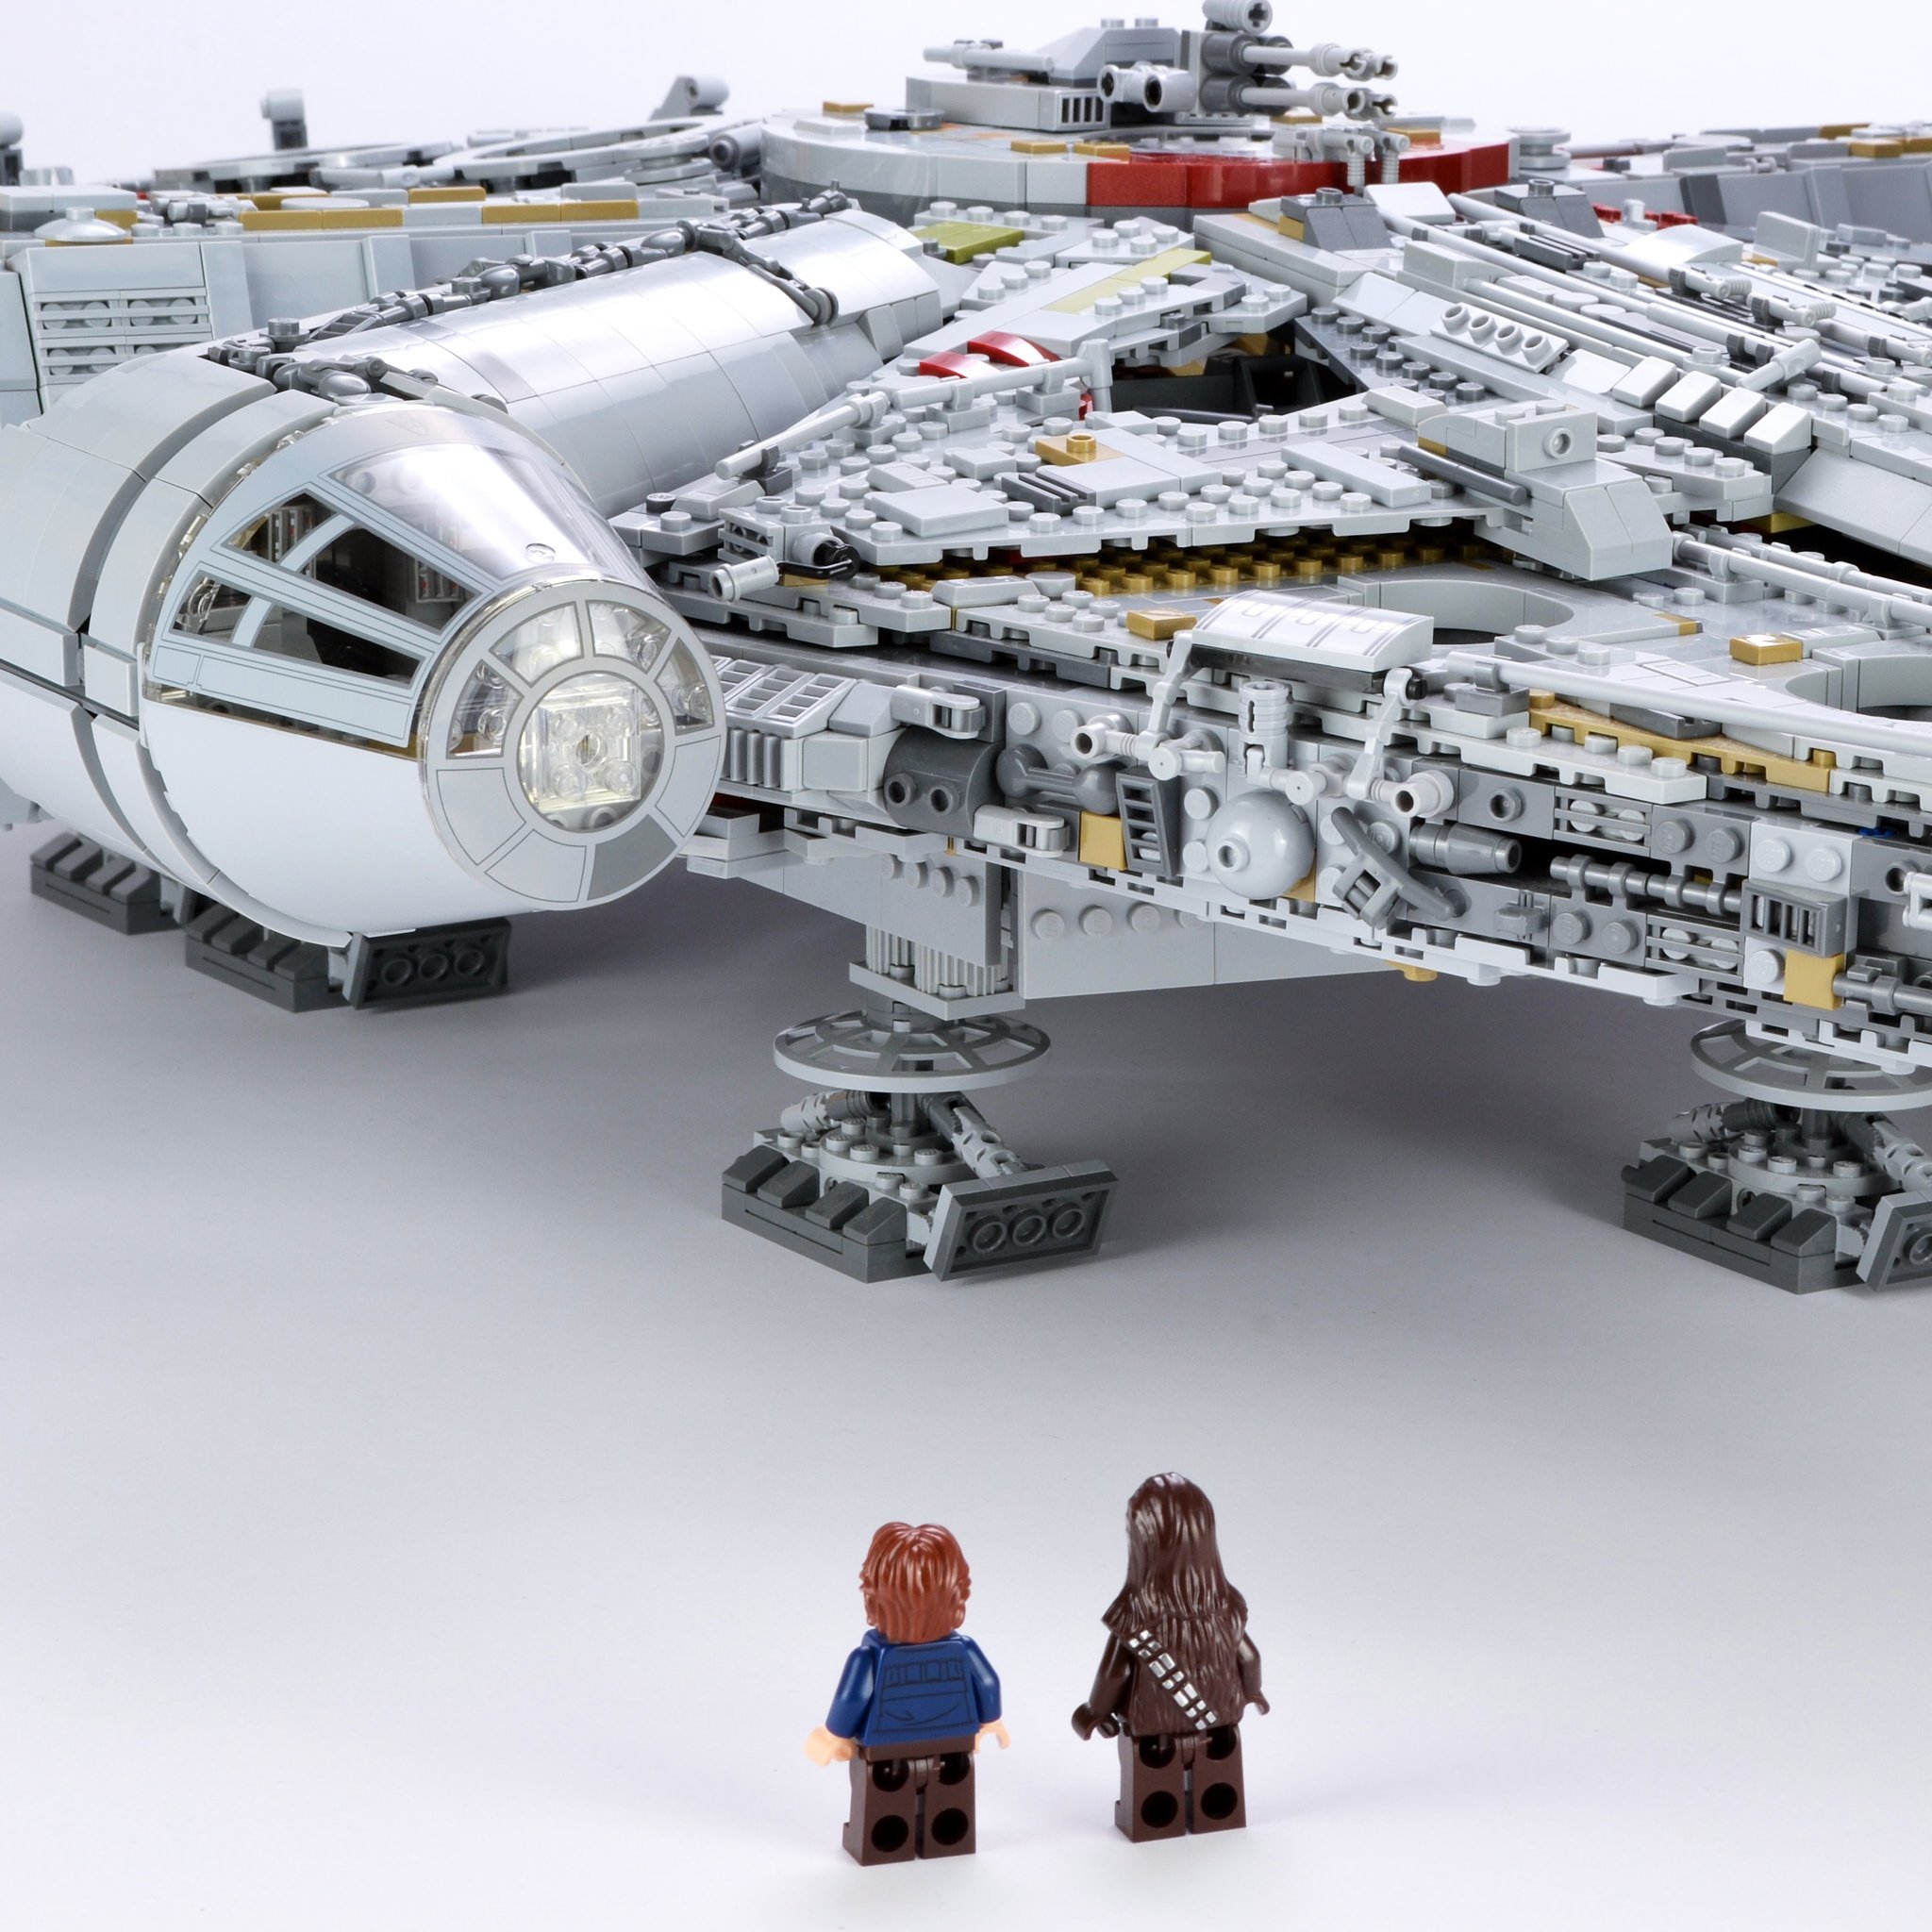 Big Beasts: The Rise of Large LEGO Sets - BrickNerd - All things LEGO and the LEGO community